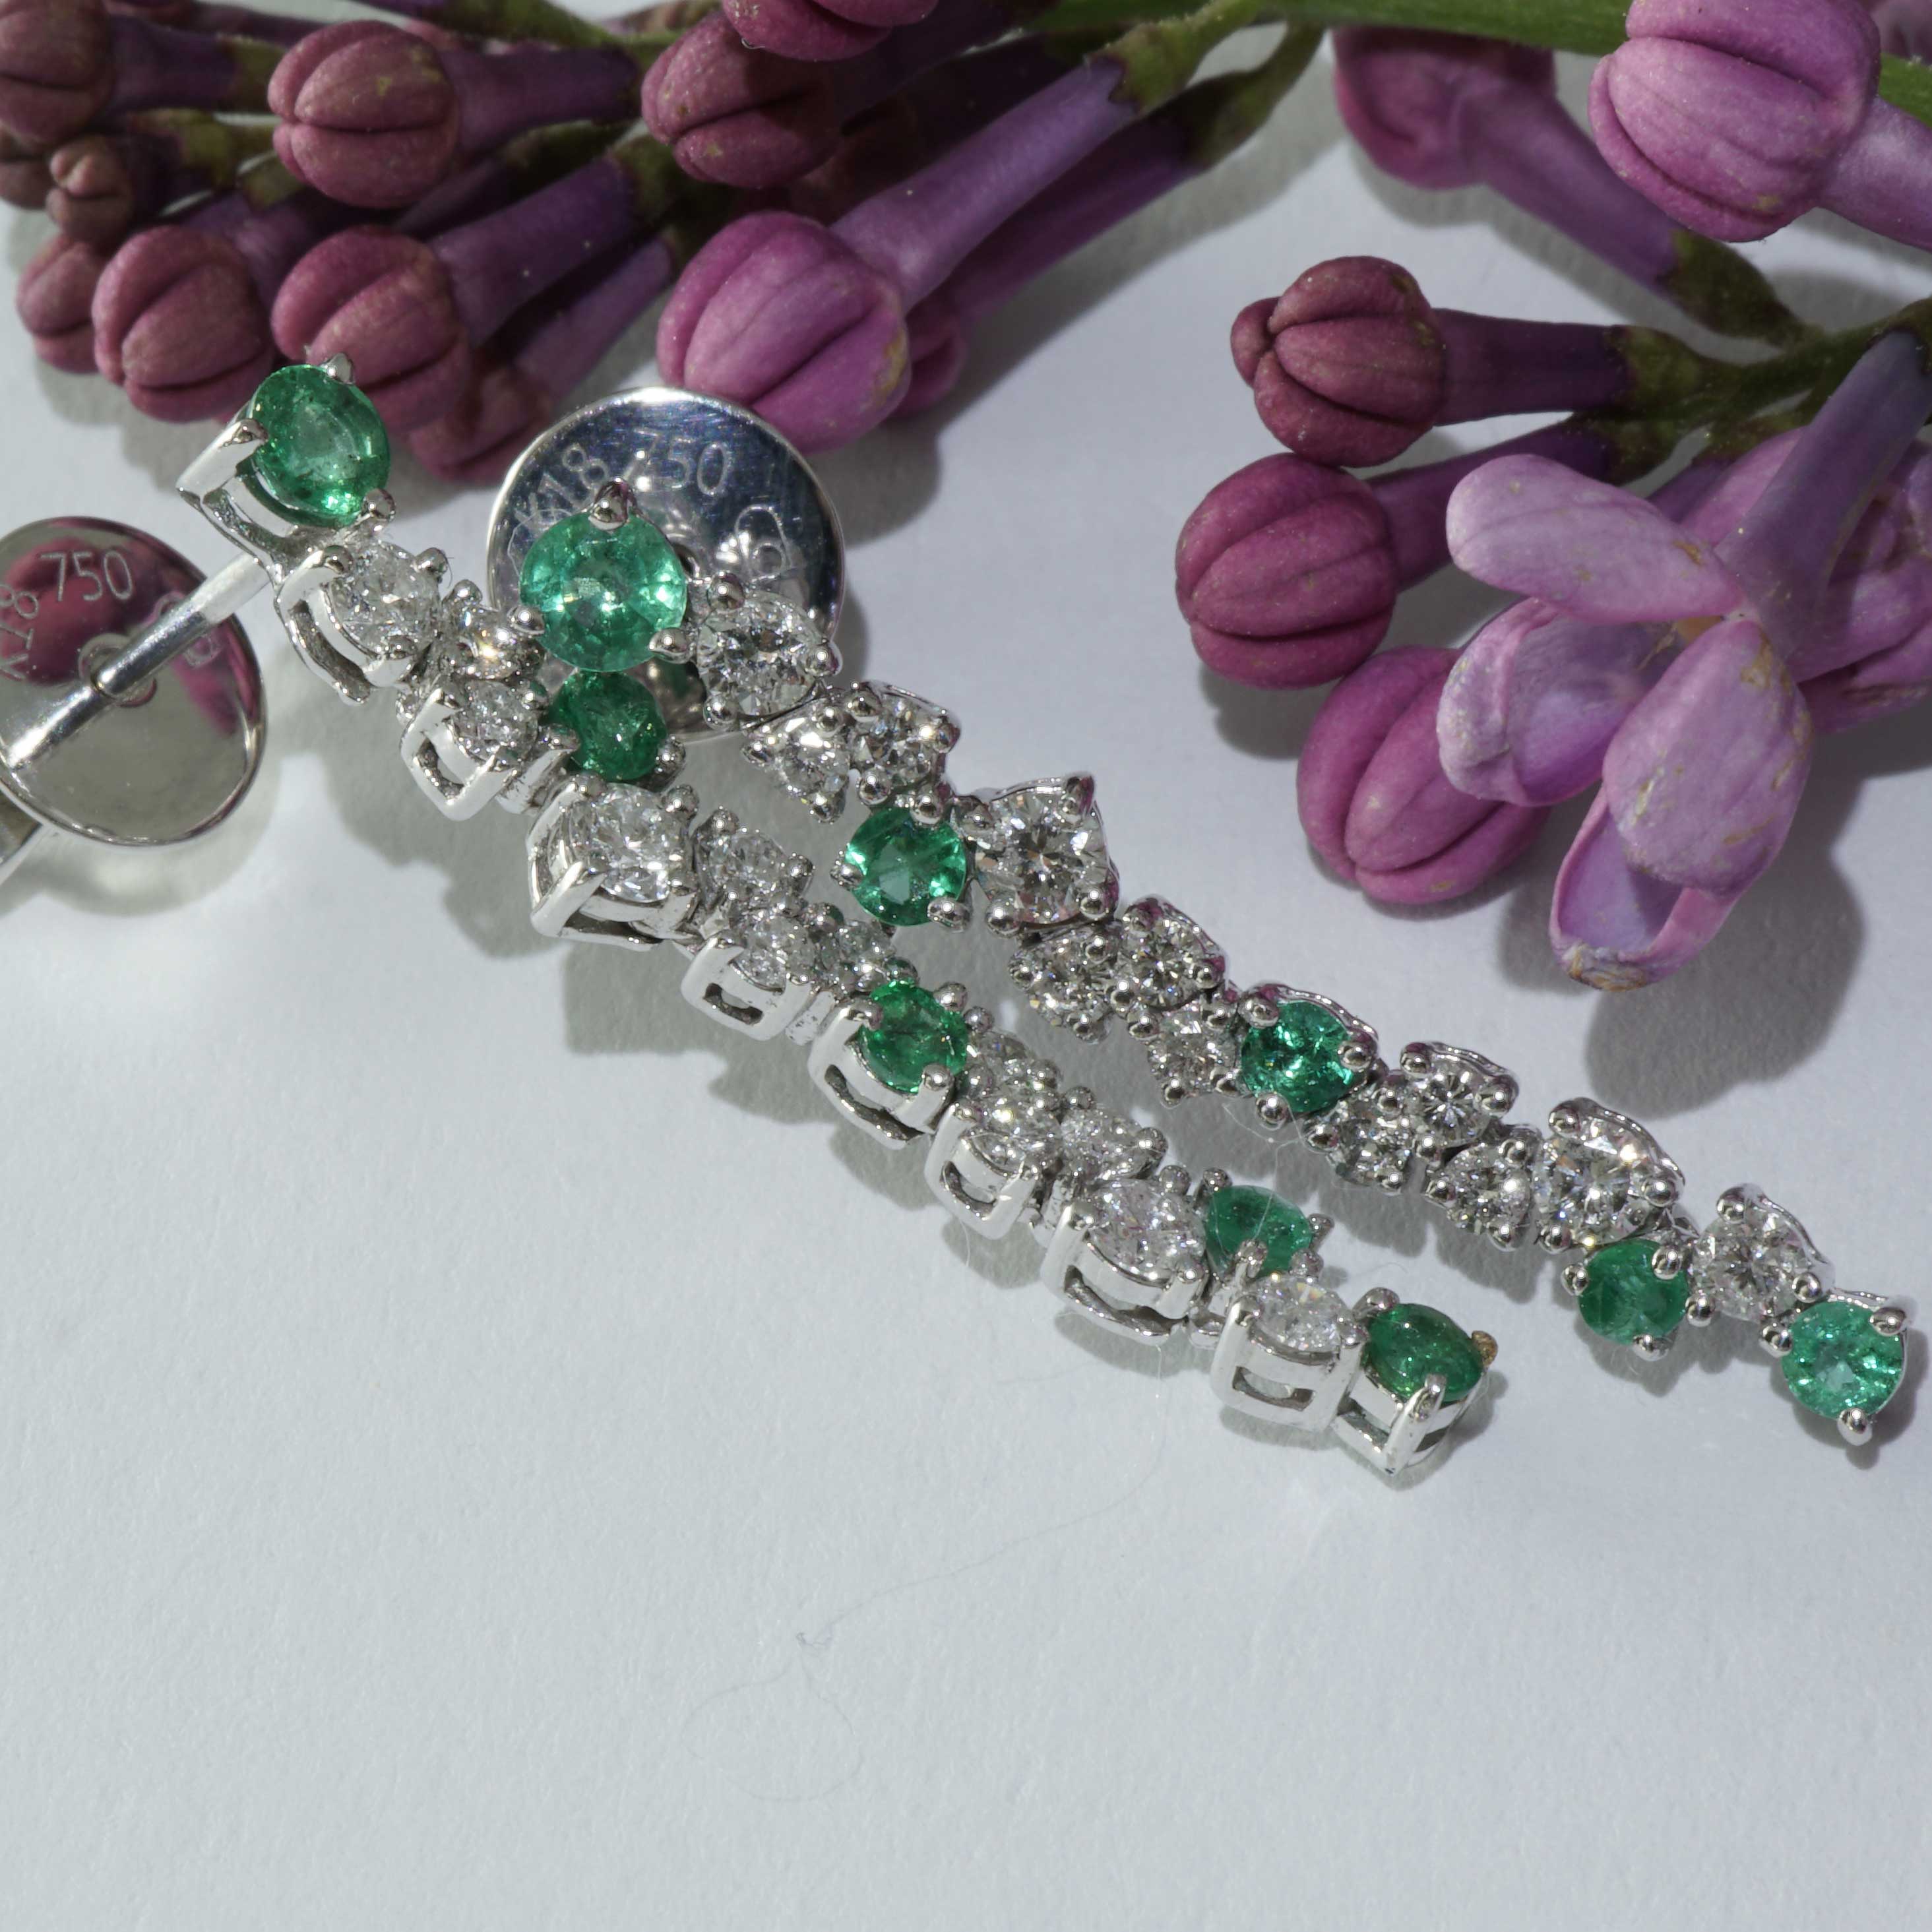 enchanting earrings for a glorious appearance in linear arrangement with staggered set emeralds and brilliant-cut diamonds, 10 round-faced fine emeralds total approx. 0.40 ct, 24 small and larger full-cut brilliant-cut diamonds total approx. 0.56